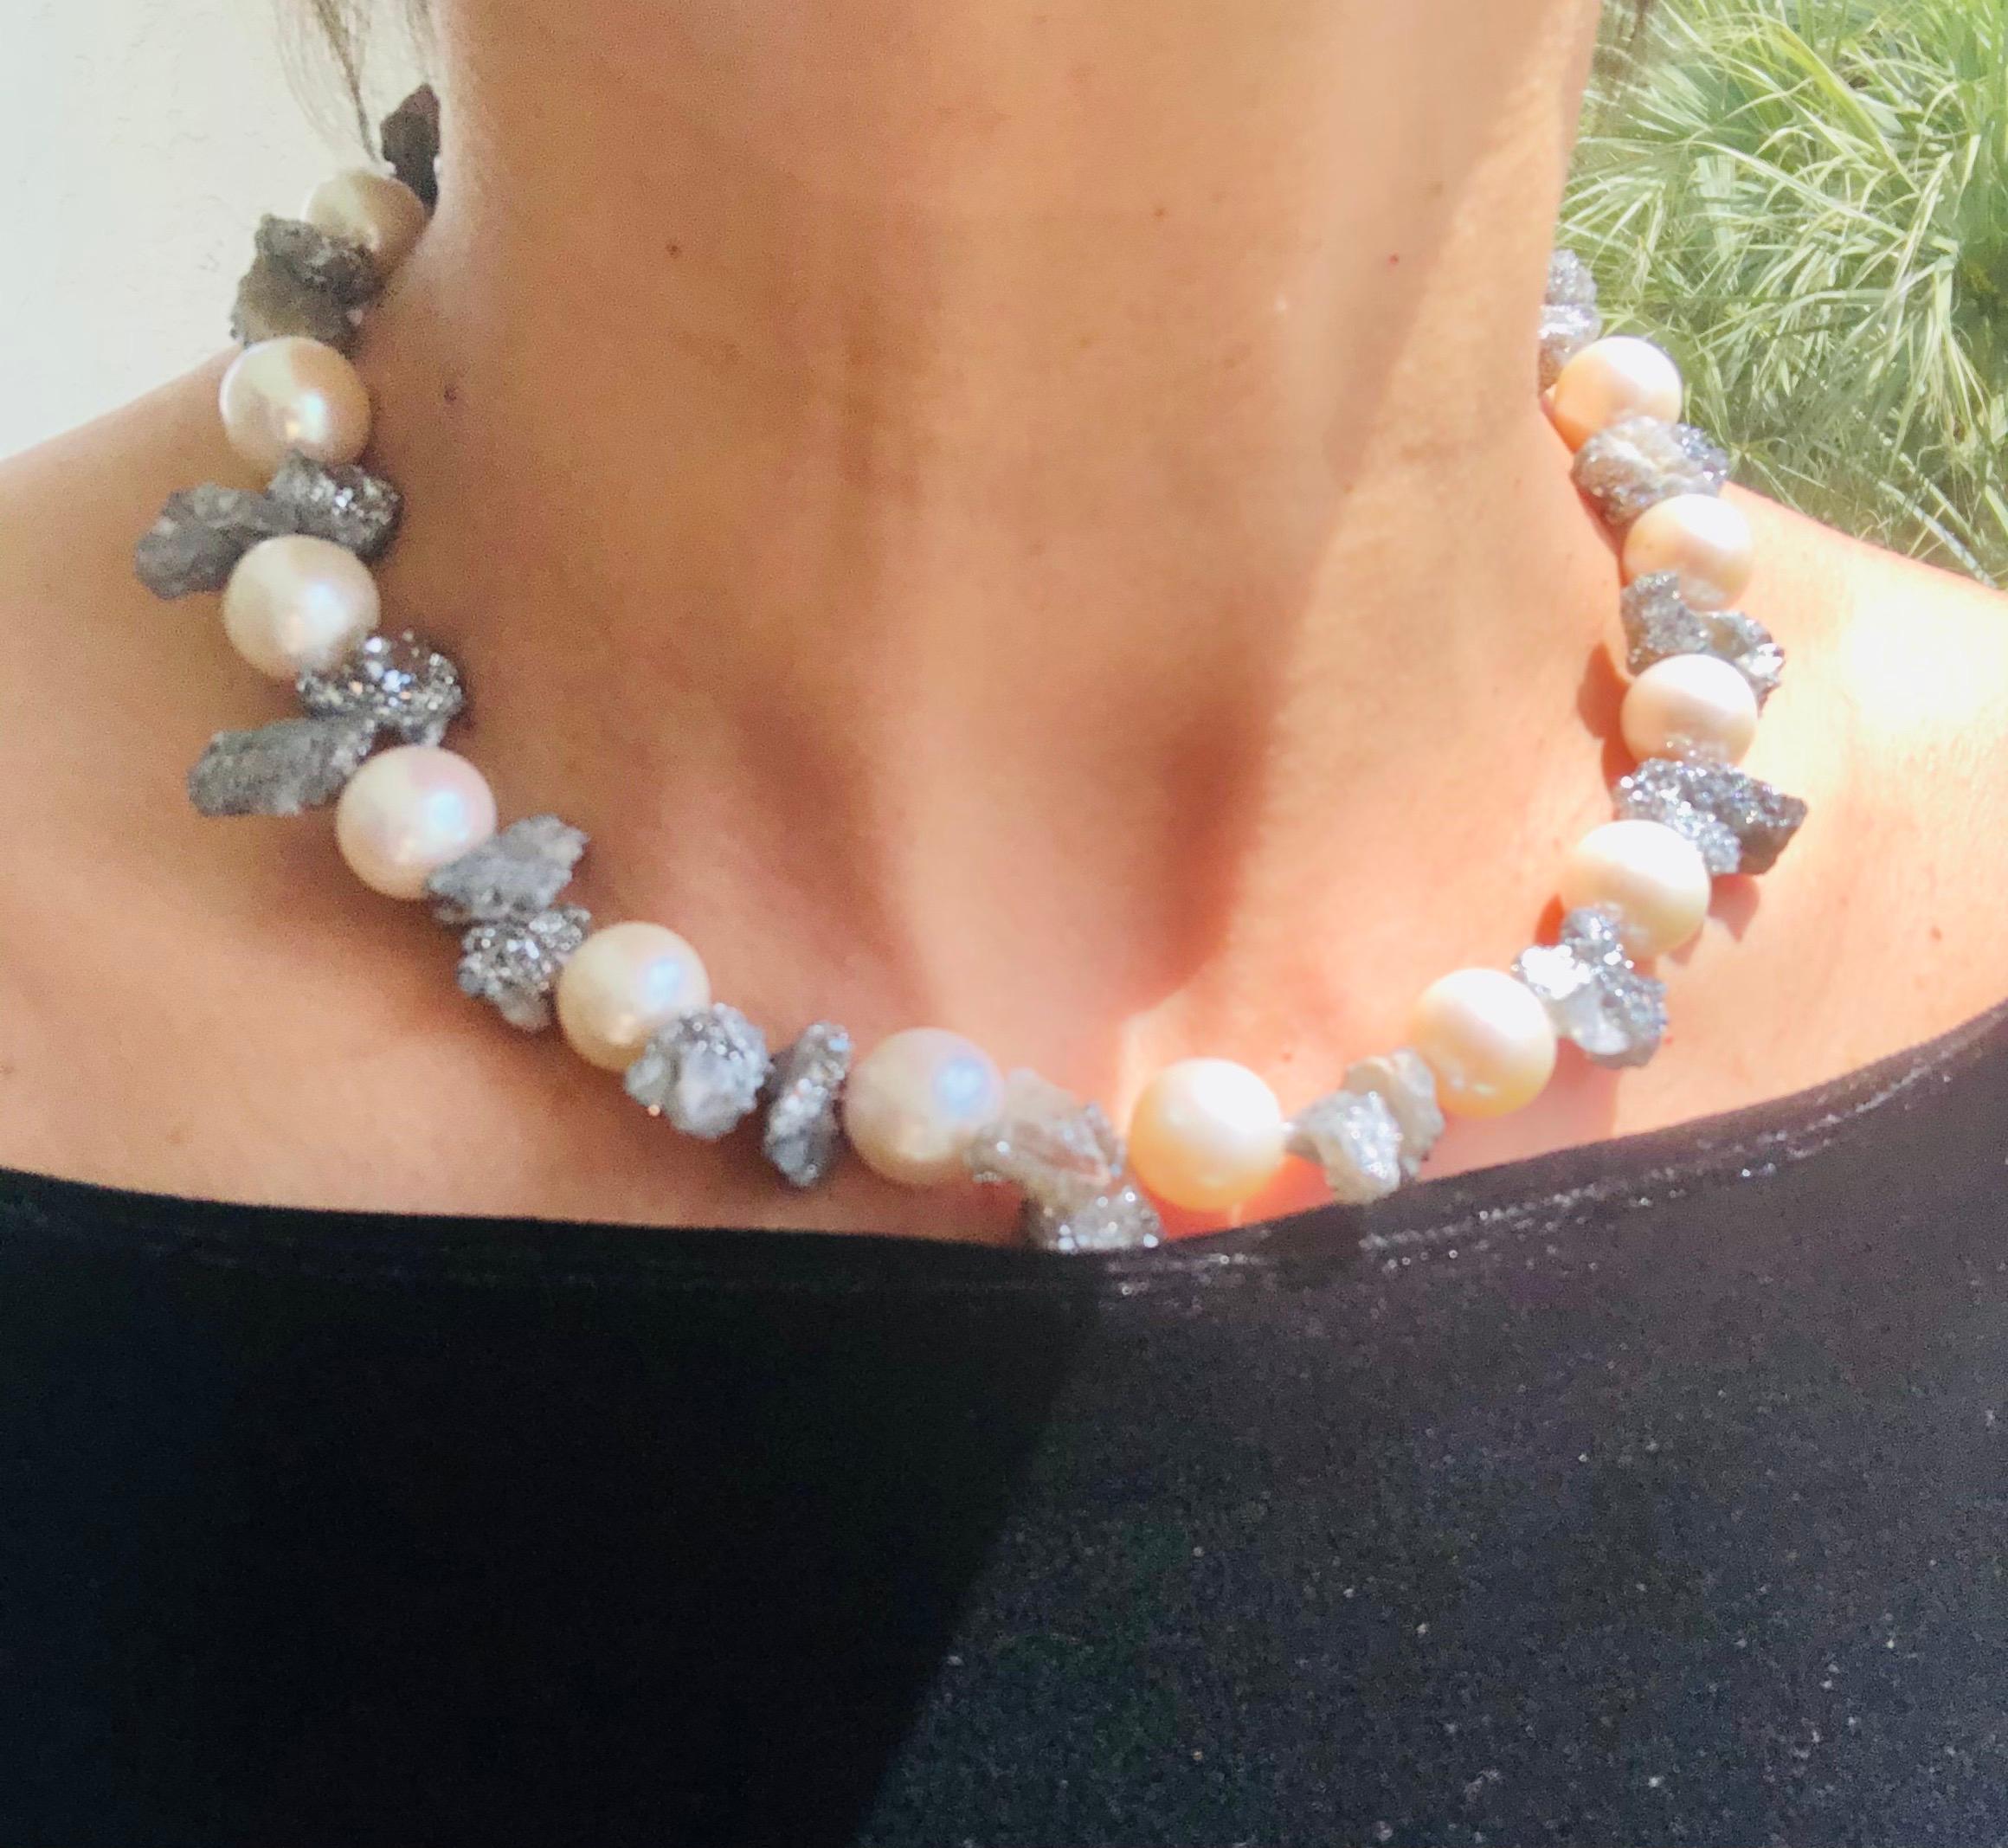 One-of-a-Kind

The glittery effect of tiny crystals on a rock fracture, in this case, Petercite, makes these druzy stones a perfect foil for the smooth textured pearls. Anchored by a vintage glass clasp that echos the colors of the Druzy. A necklace